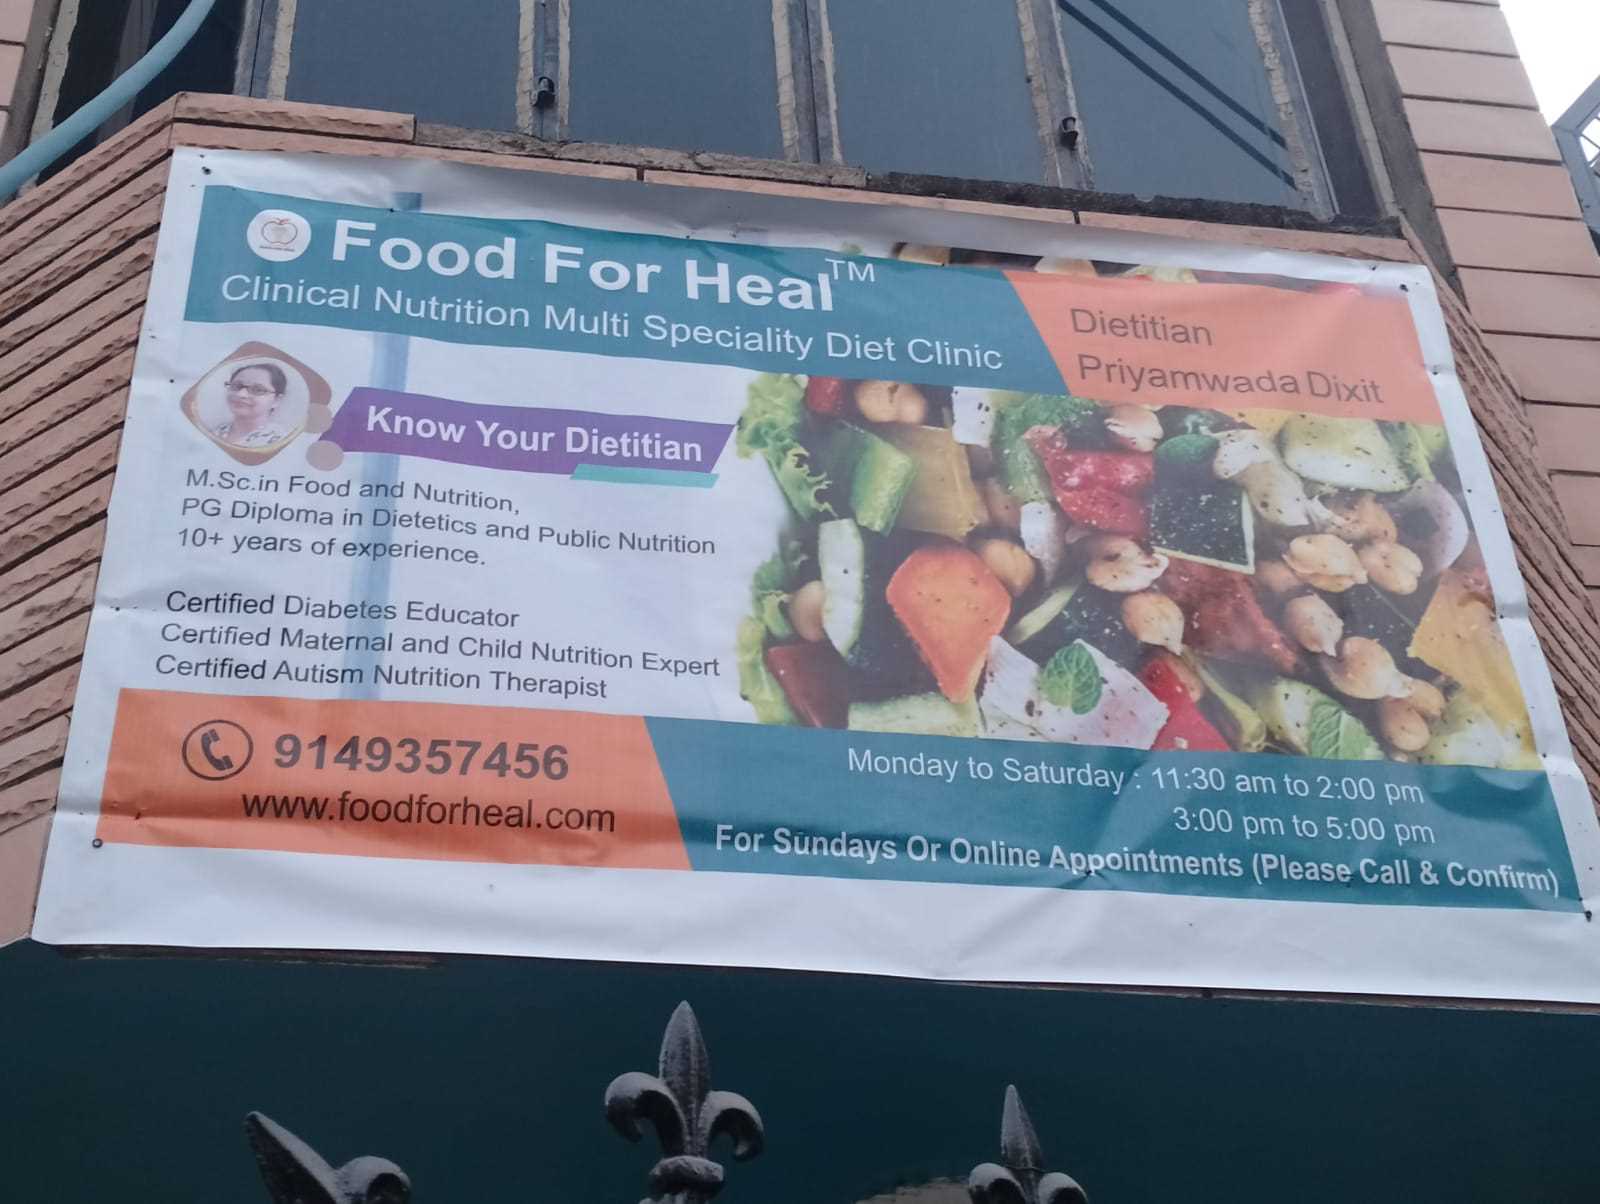 Food for Heal